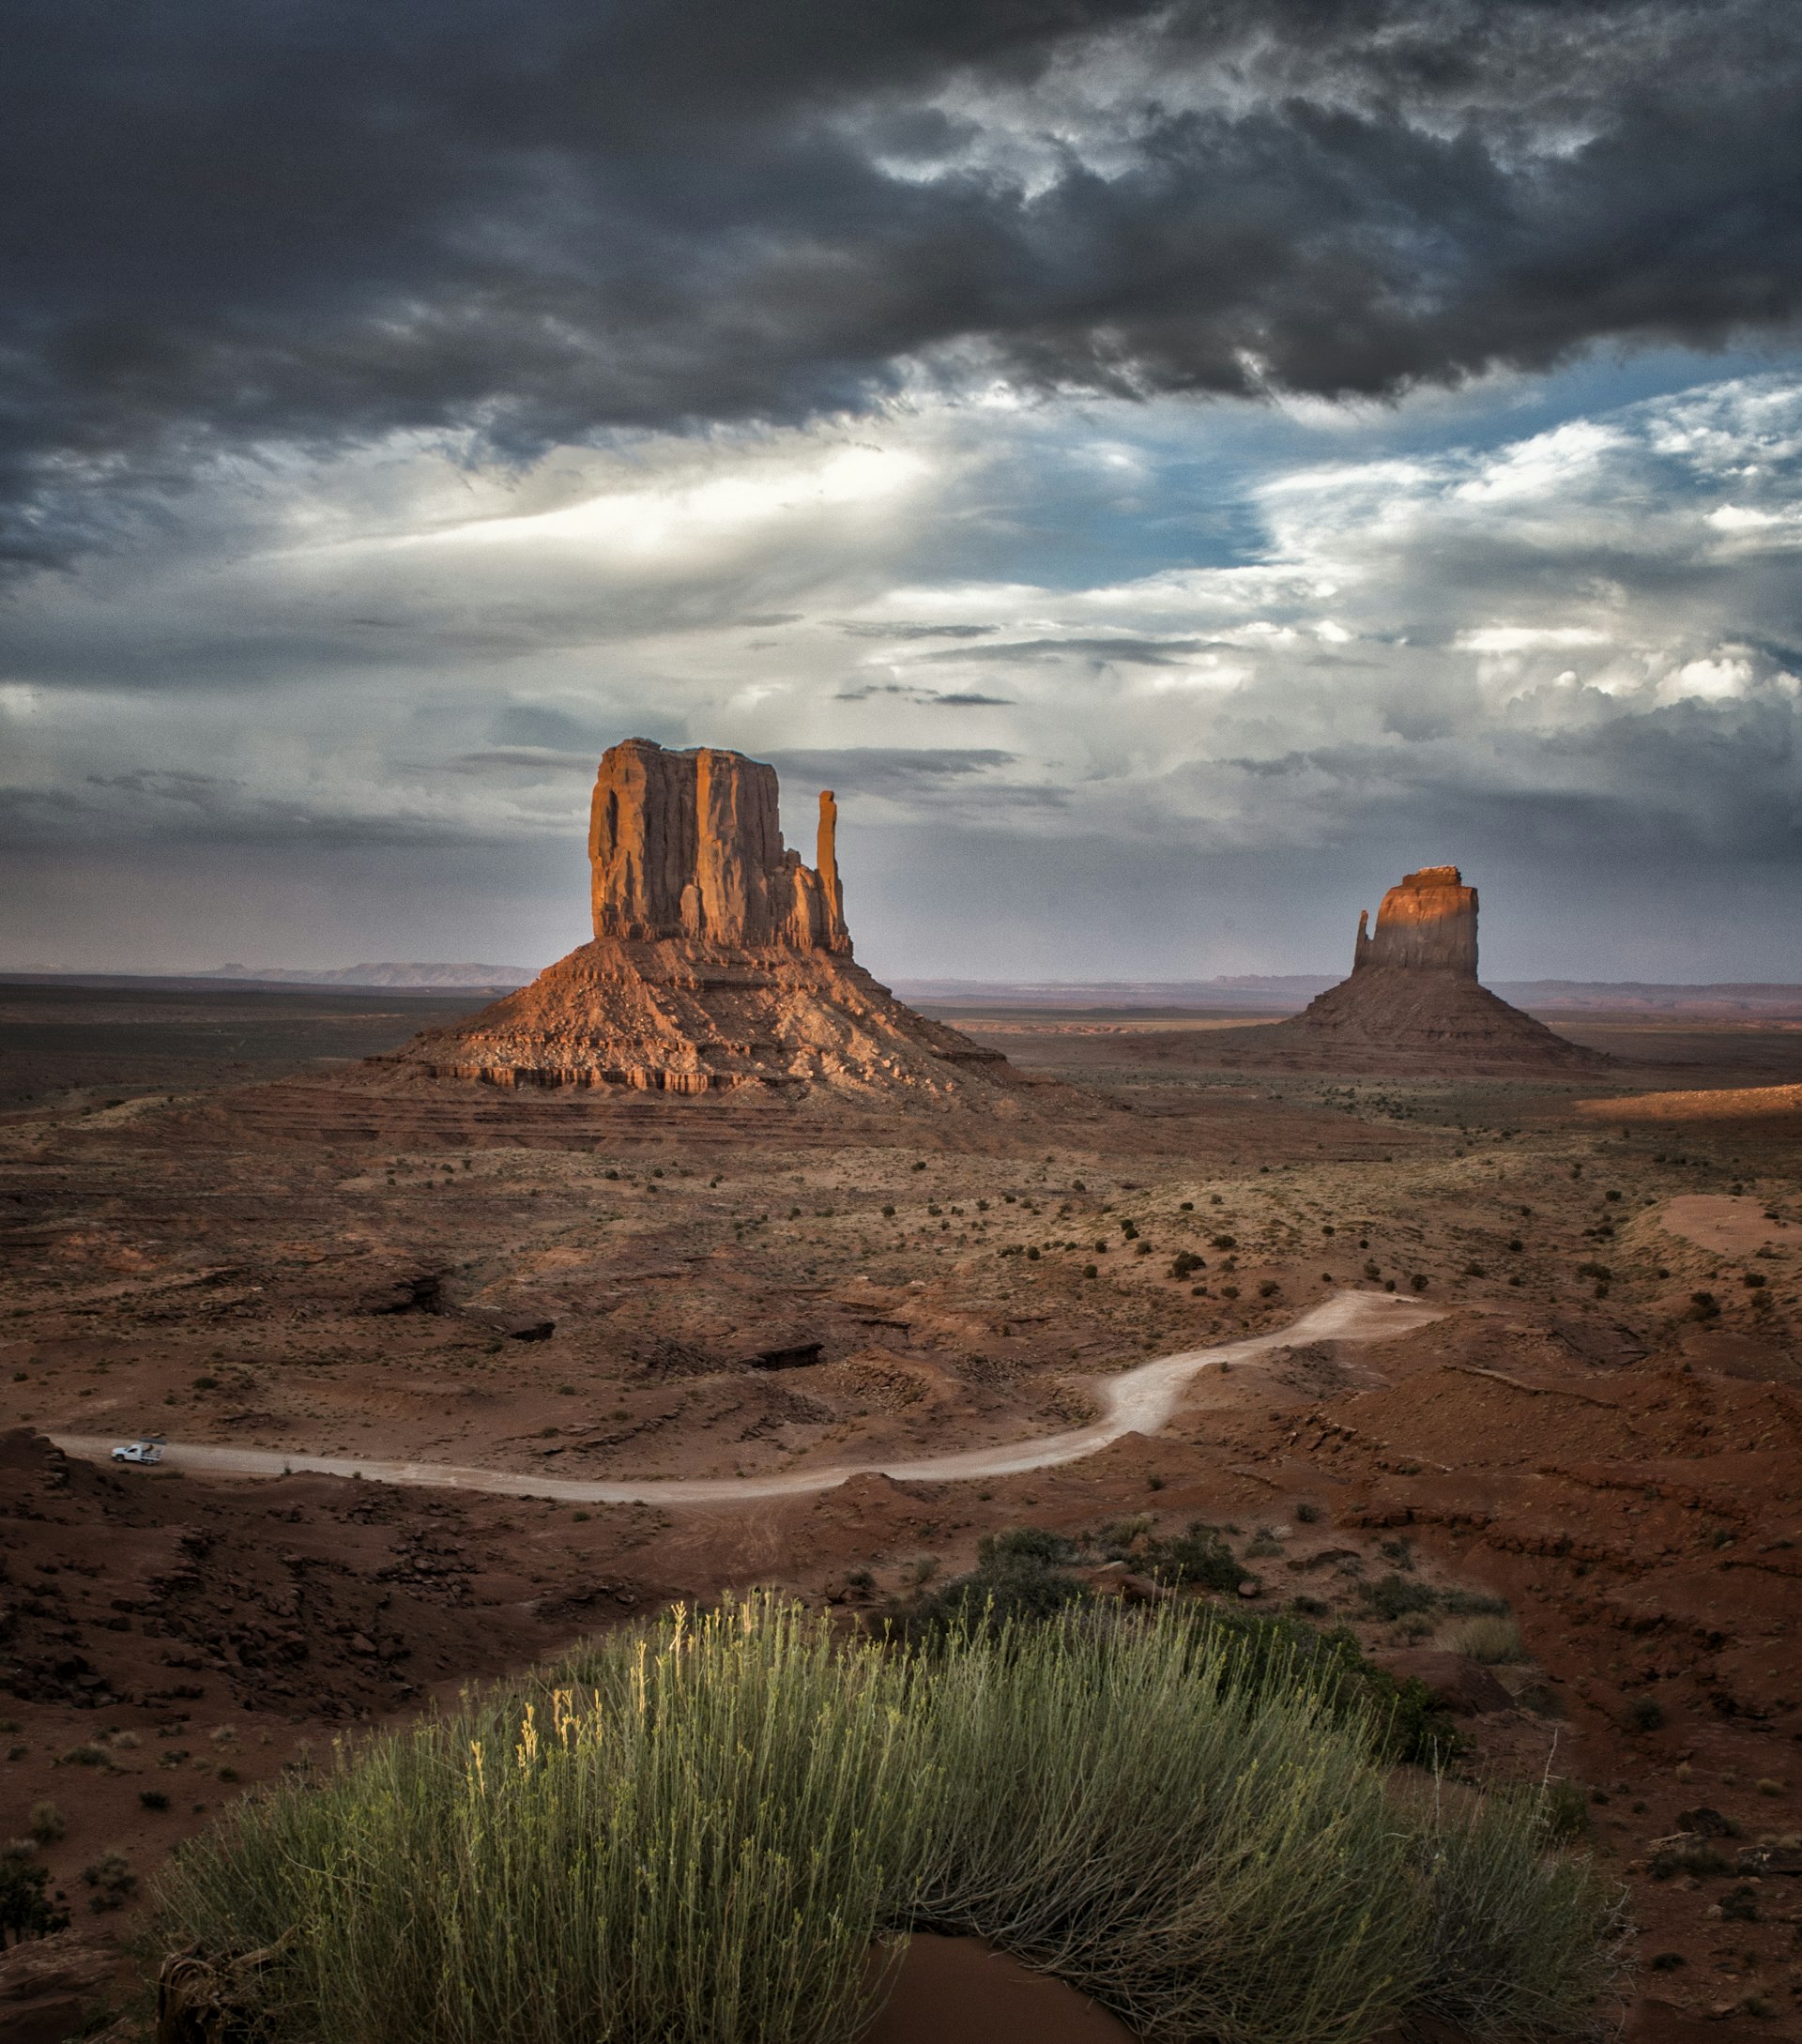 A grey sky threatening storms over the tall red rocky outcrops of Monument Valley